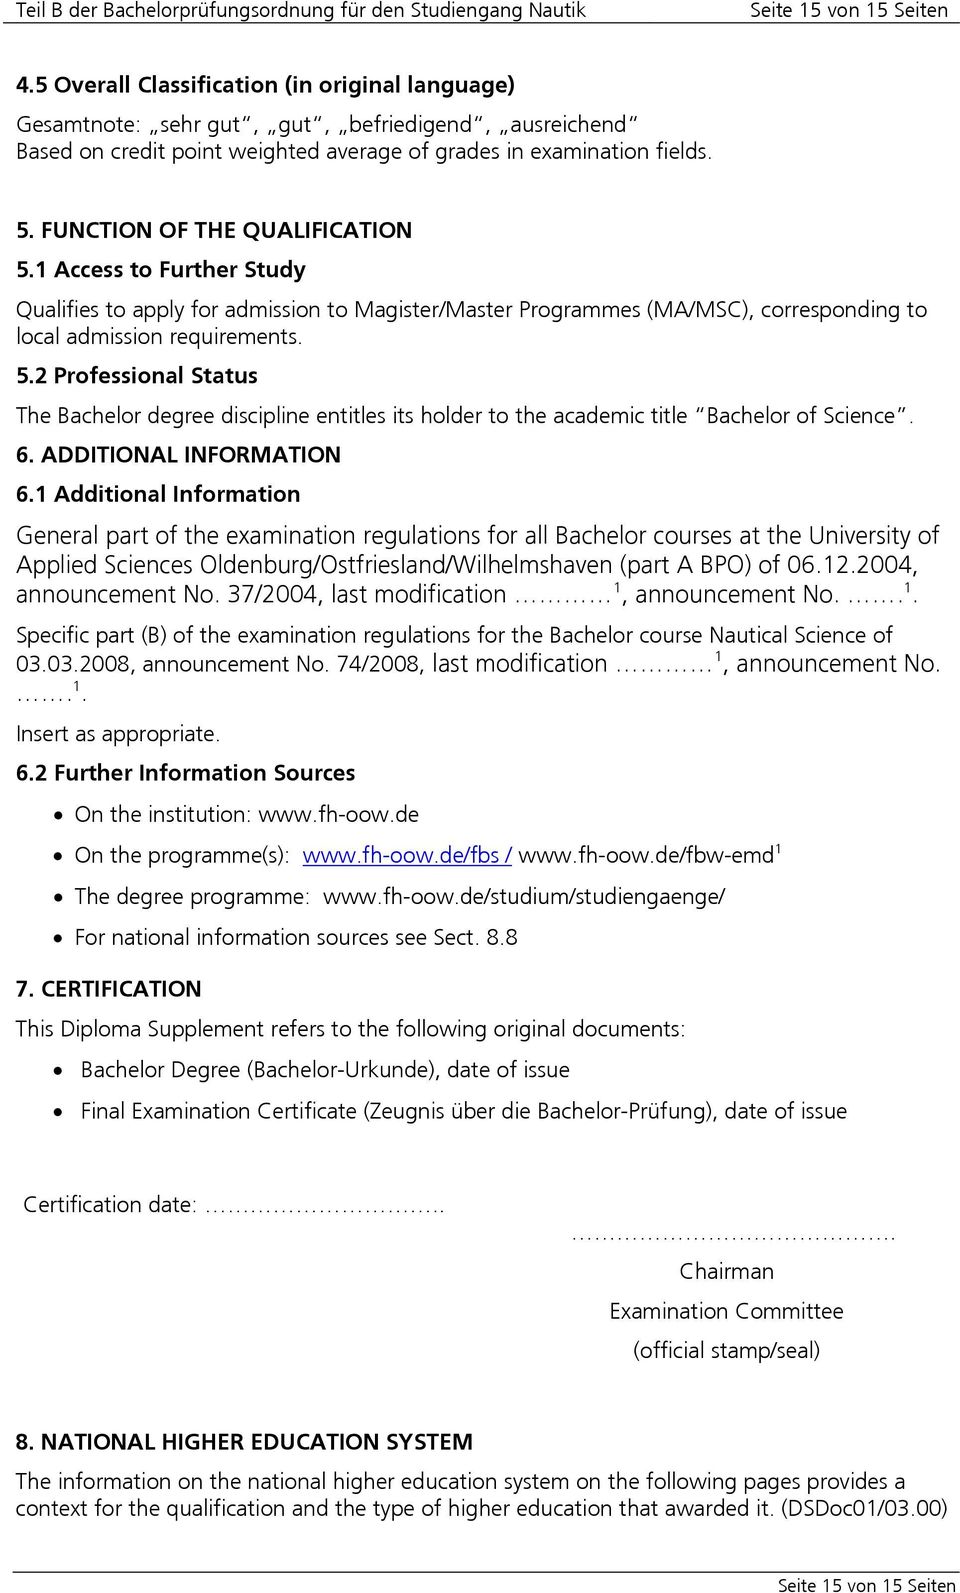 FUNCTION OF THE QUALIFICATION 5.1 Access to Further Study Qualifies to apply for admission to Magister/Master Programmes (MA/MSC), corresponding to local admission requirements. 5.2 Professional Status The Bachelor degree discipline entitles its holder to the academic title Bachelor of Science.